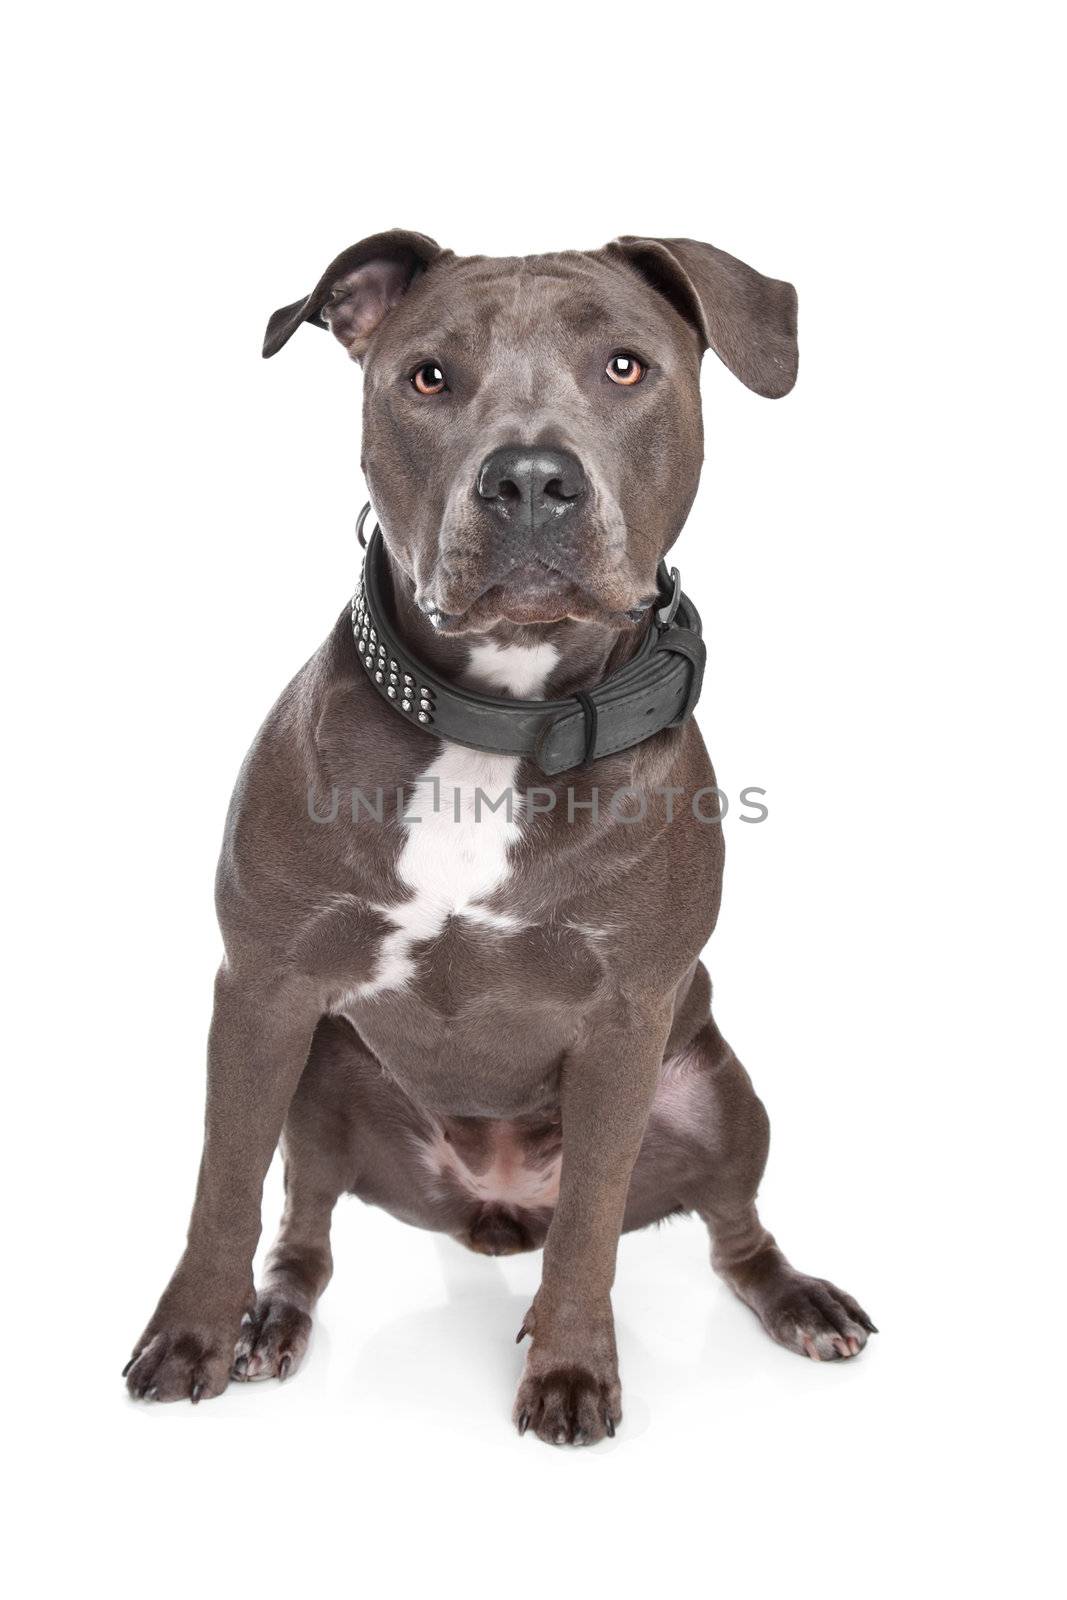 American staffordshire terrier in front of a white background